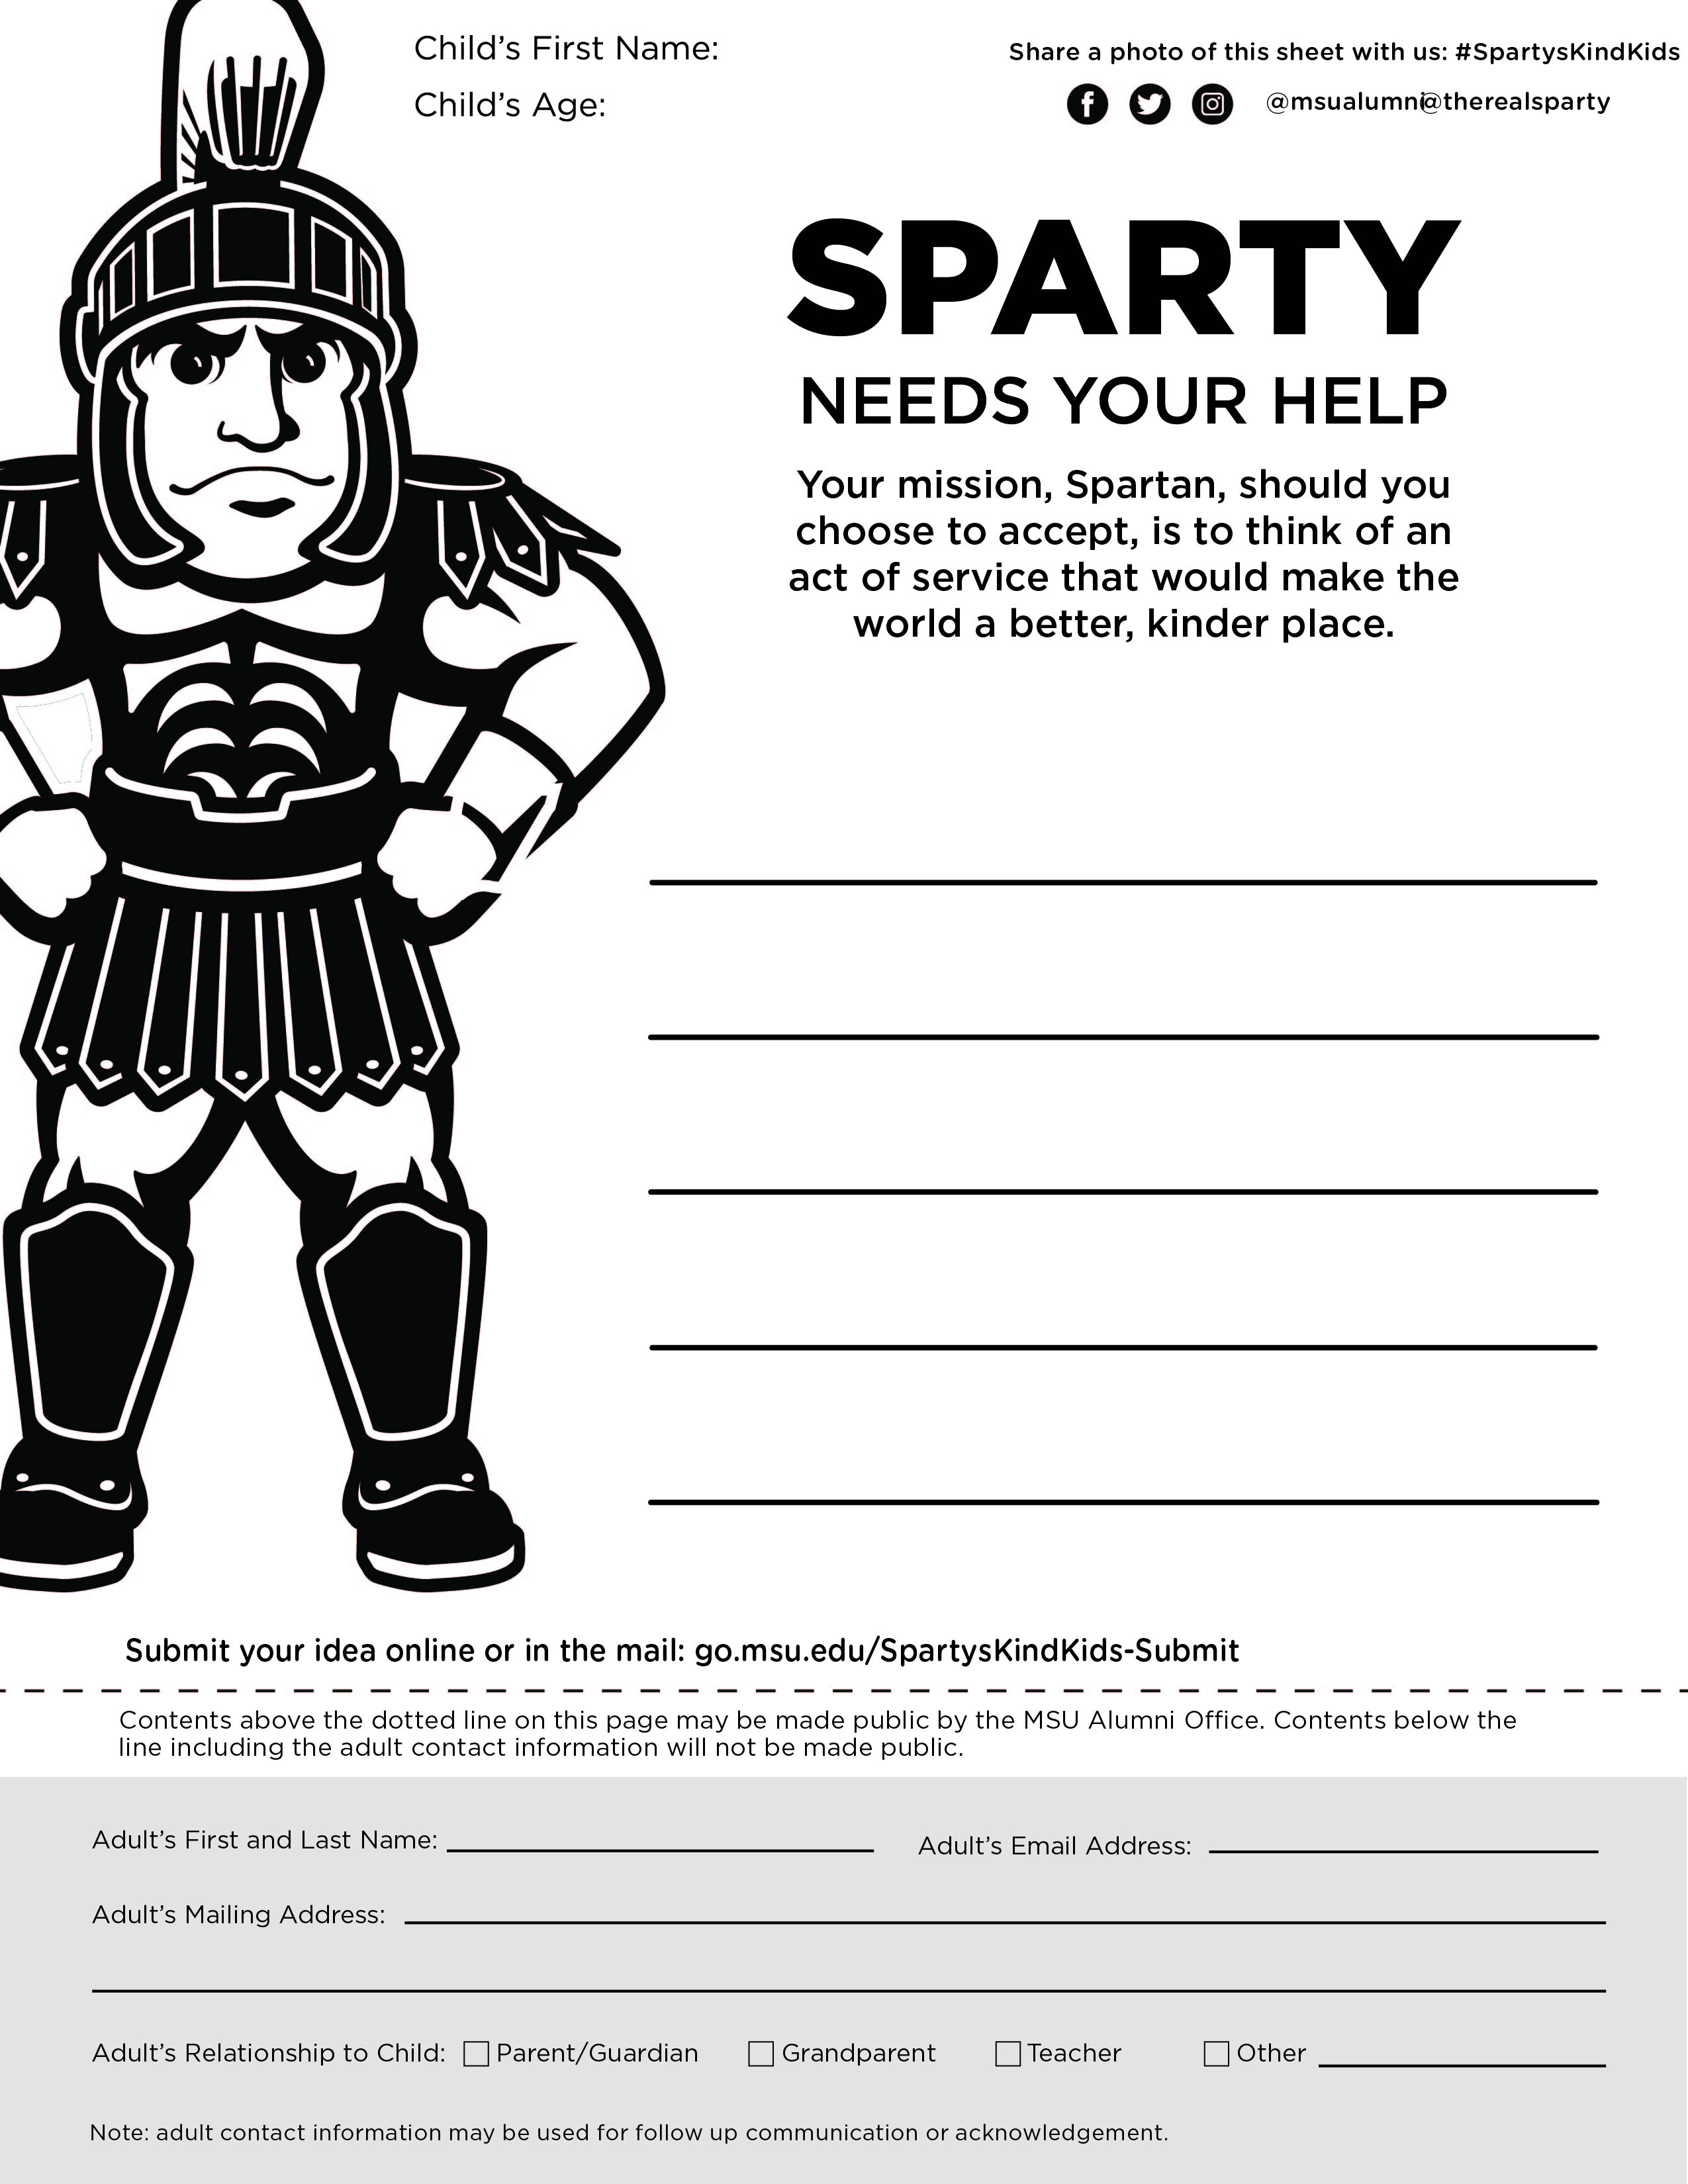 Photos of worksheet with Sparty